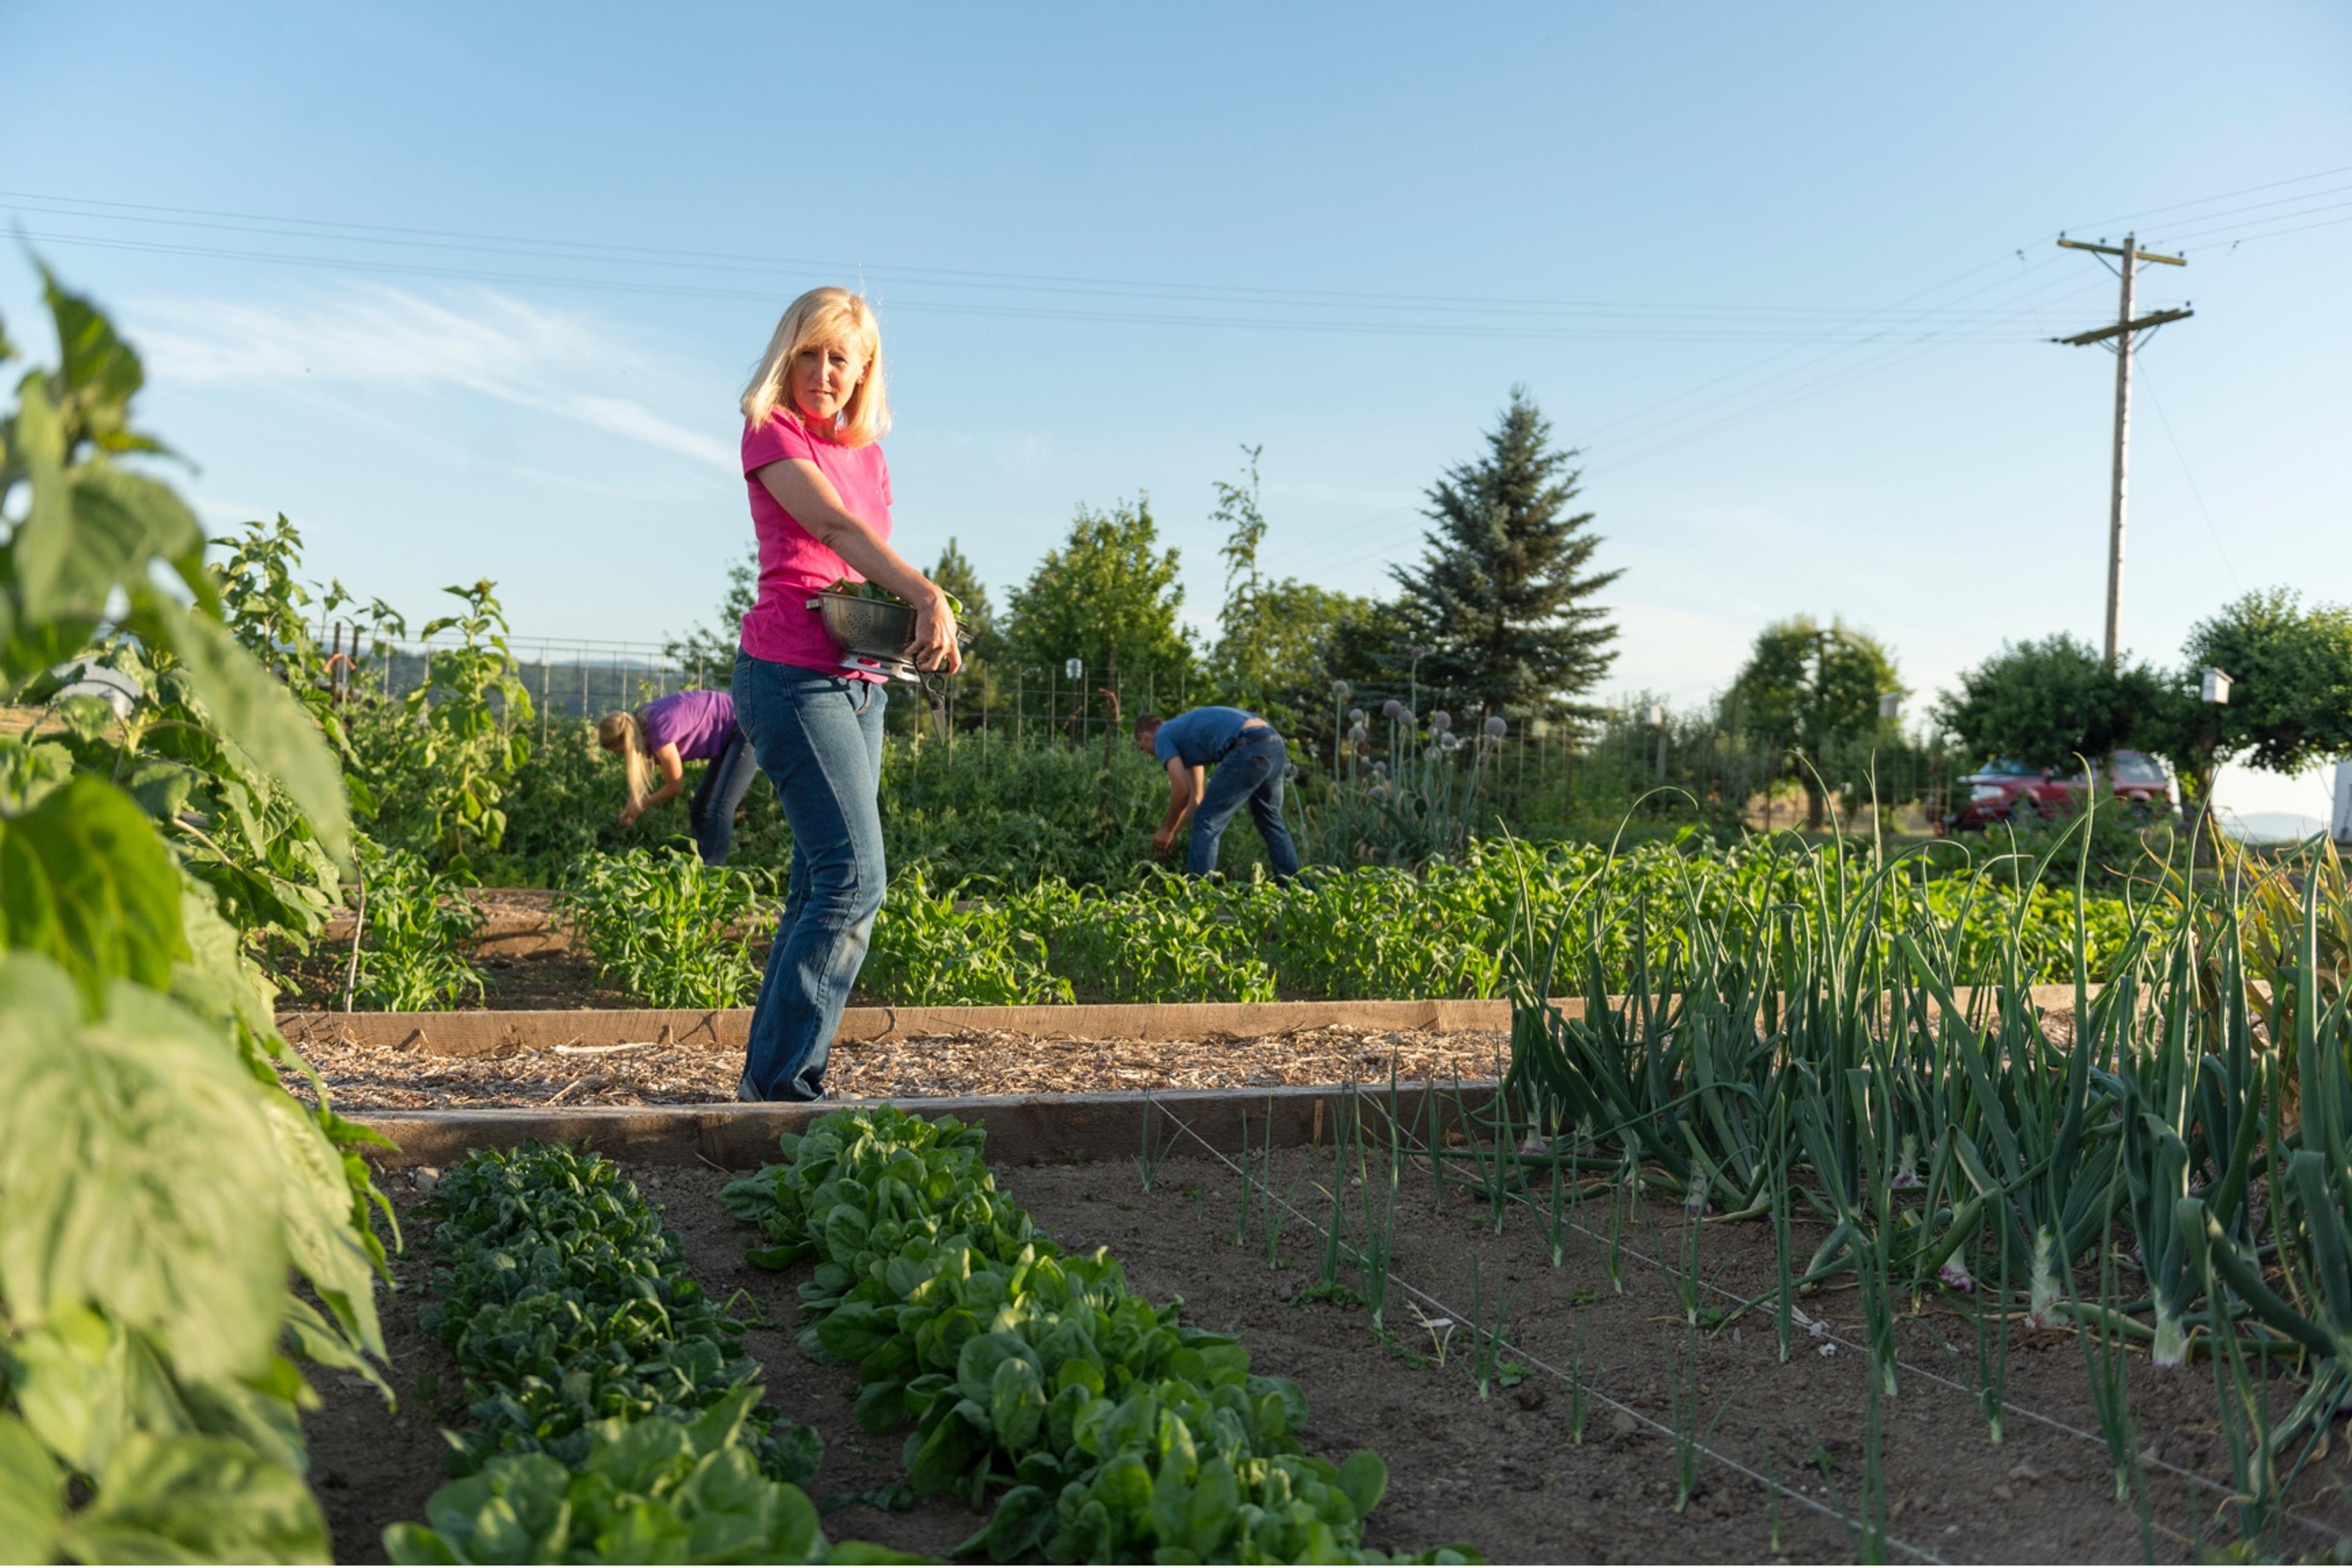 Juli Bansen overlooks her bountiful farm garden of spinach, onions, and more while her children weed in the background.